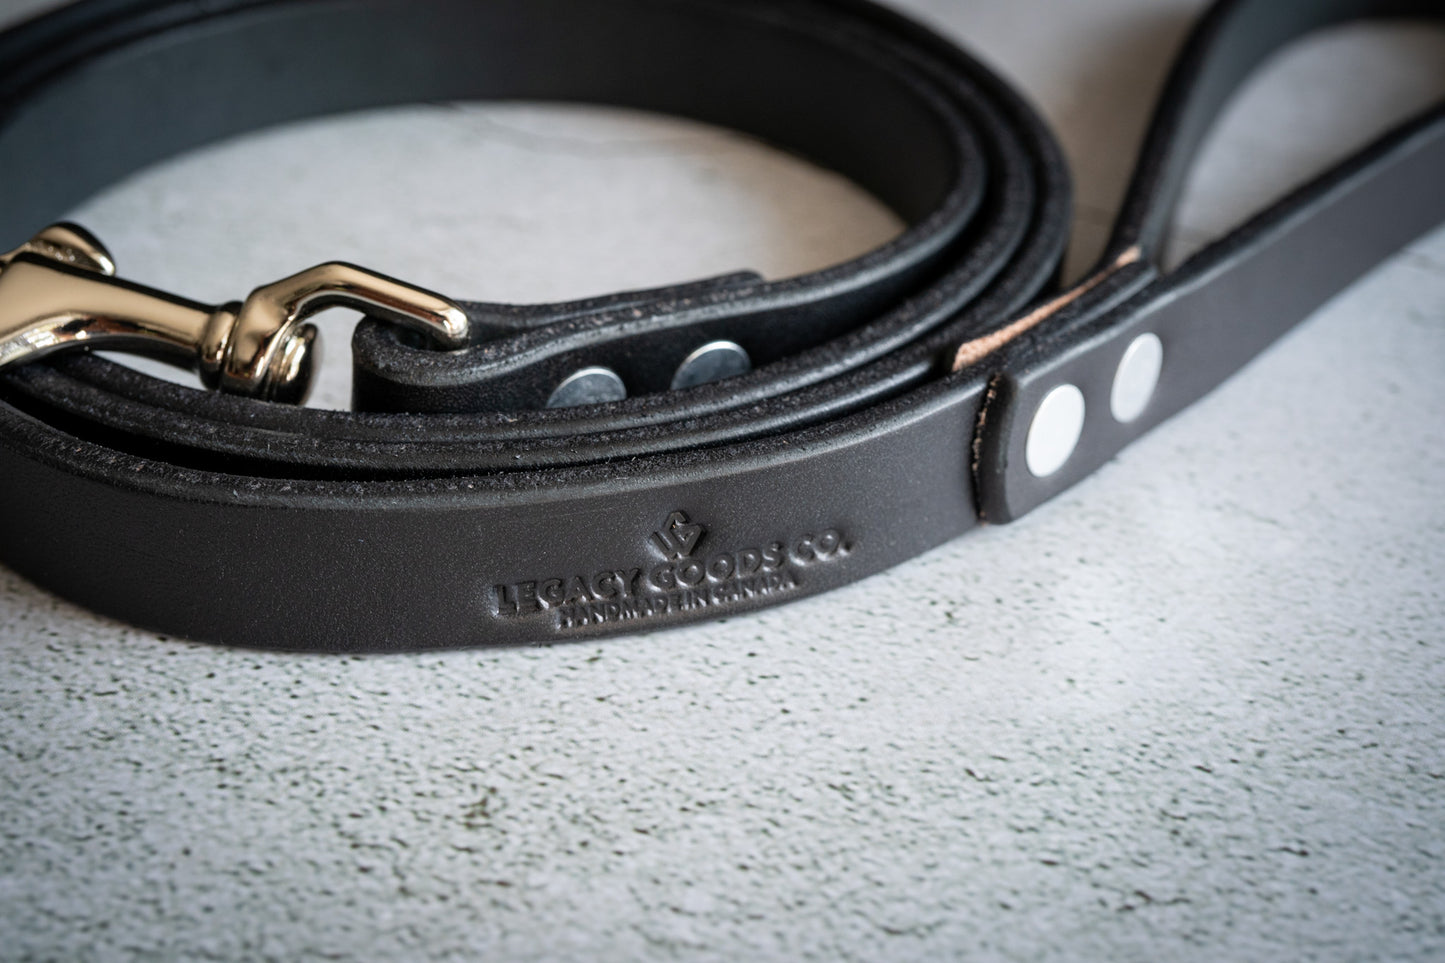 Black leather pet leash with company name printed.